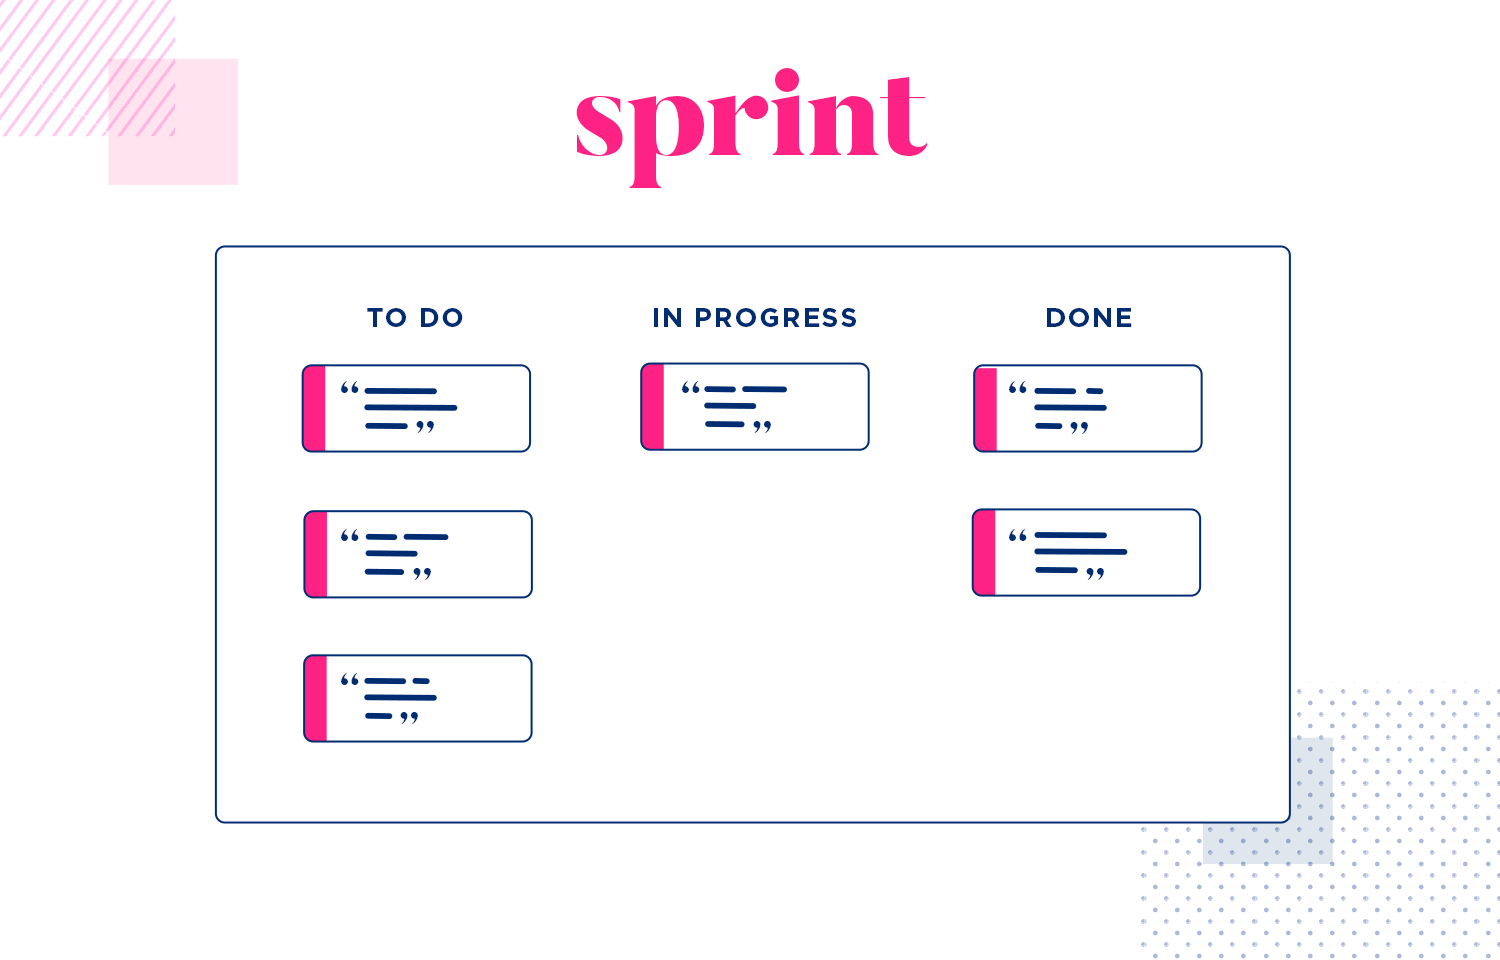 Sprint board showing tasks categorized into To Do, In Progress, and Done.